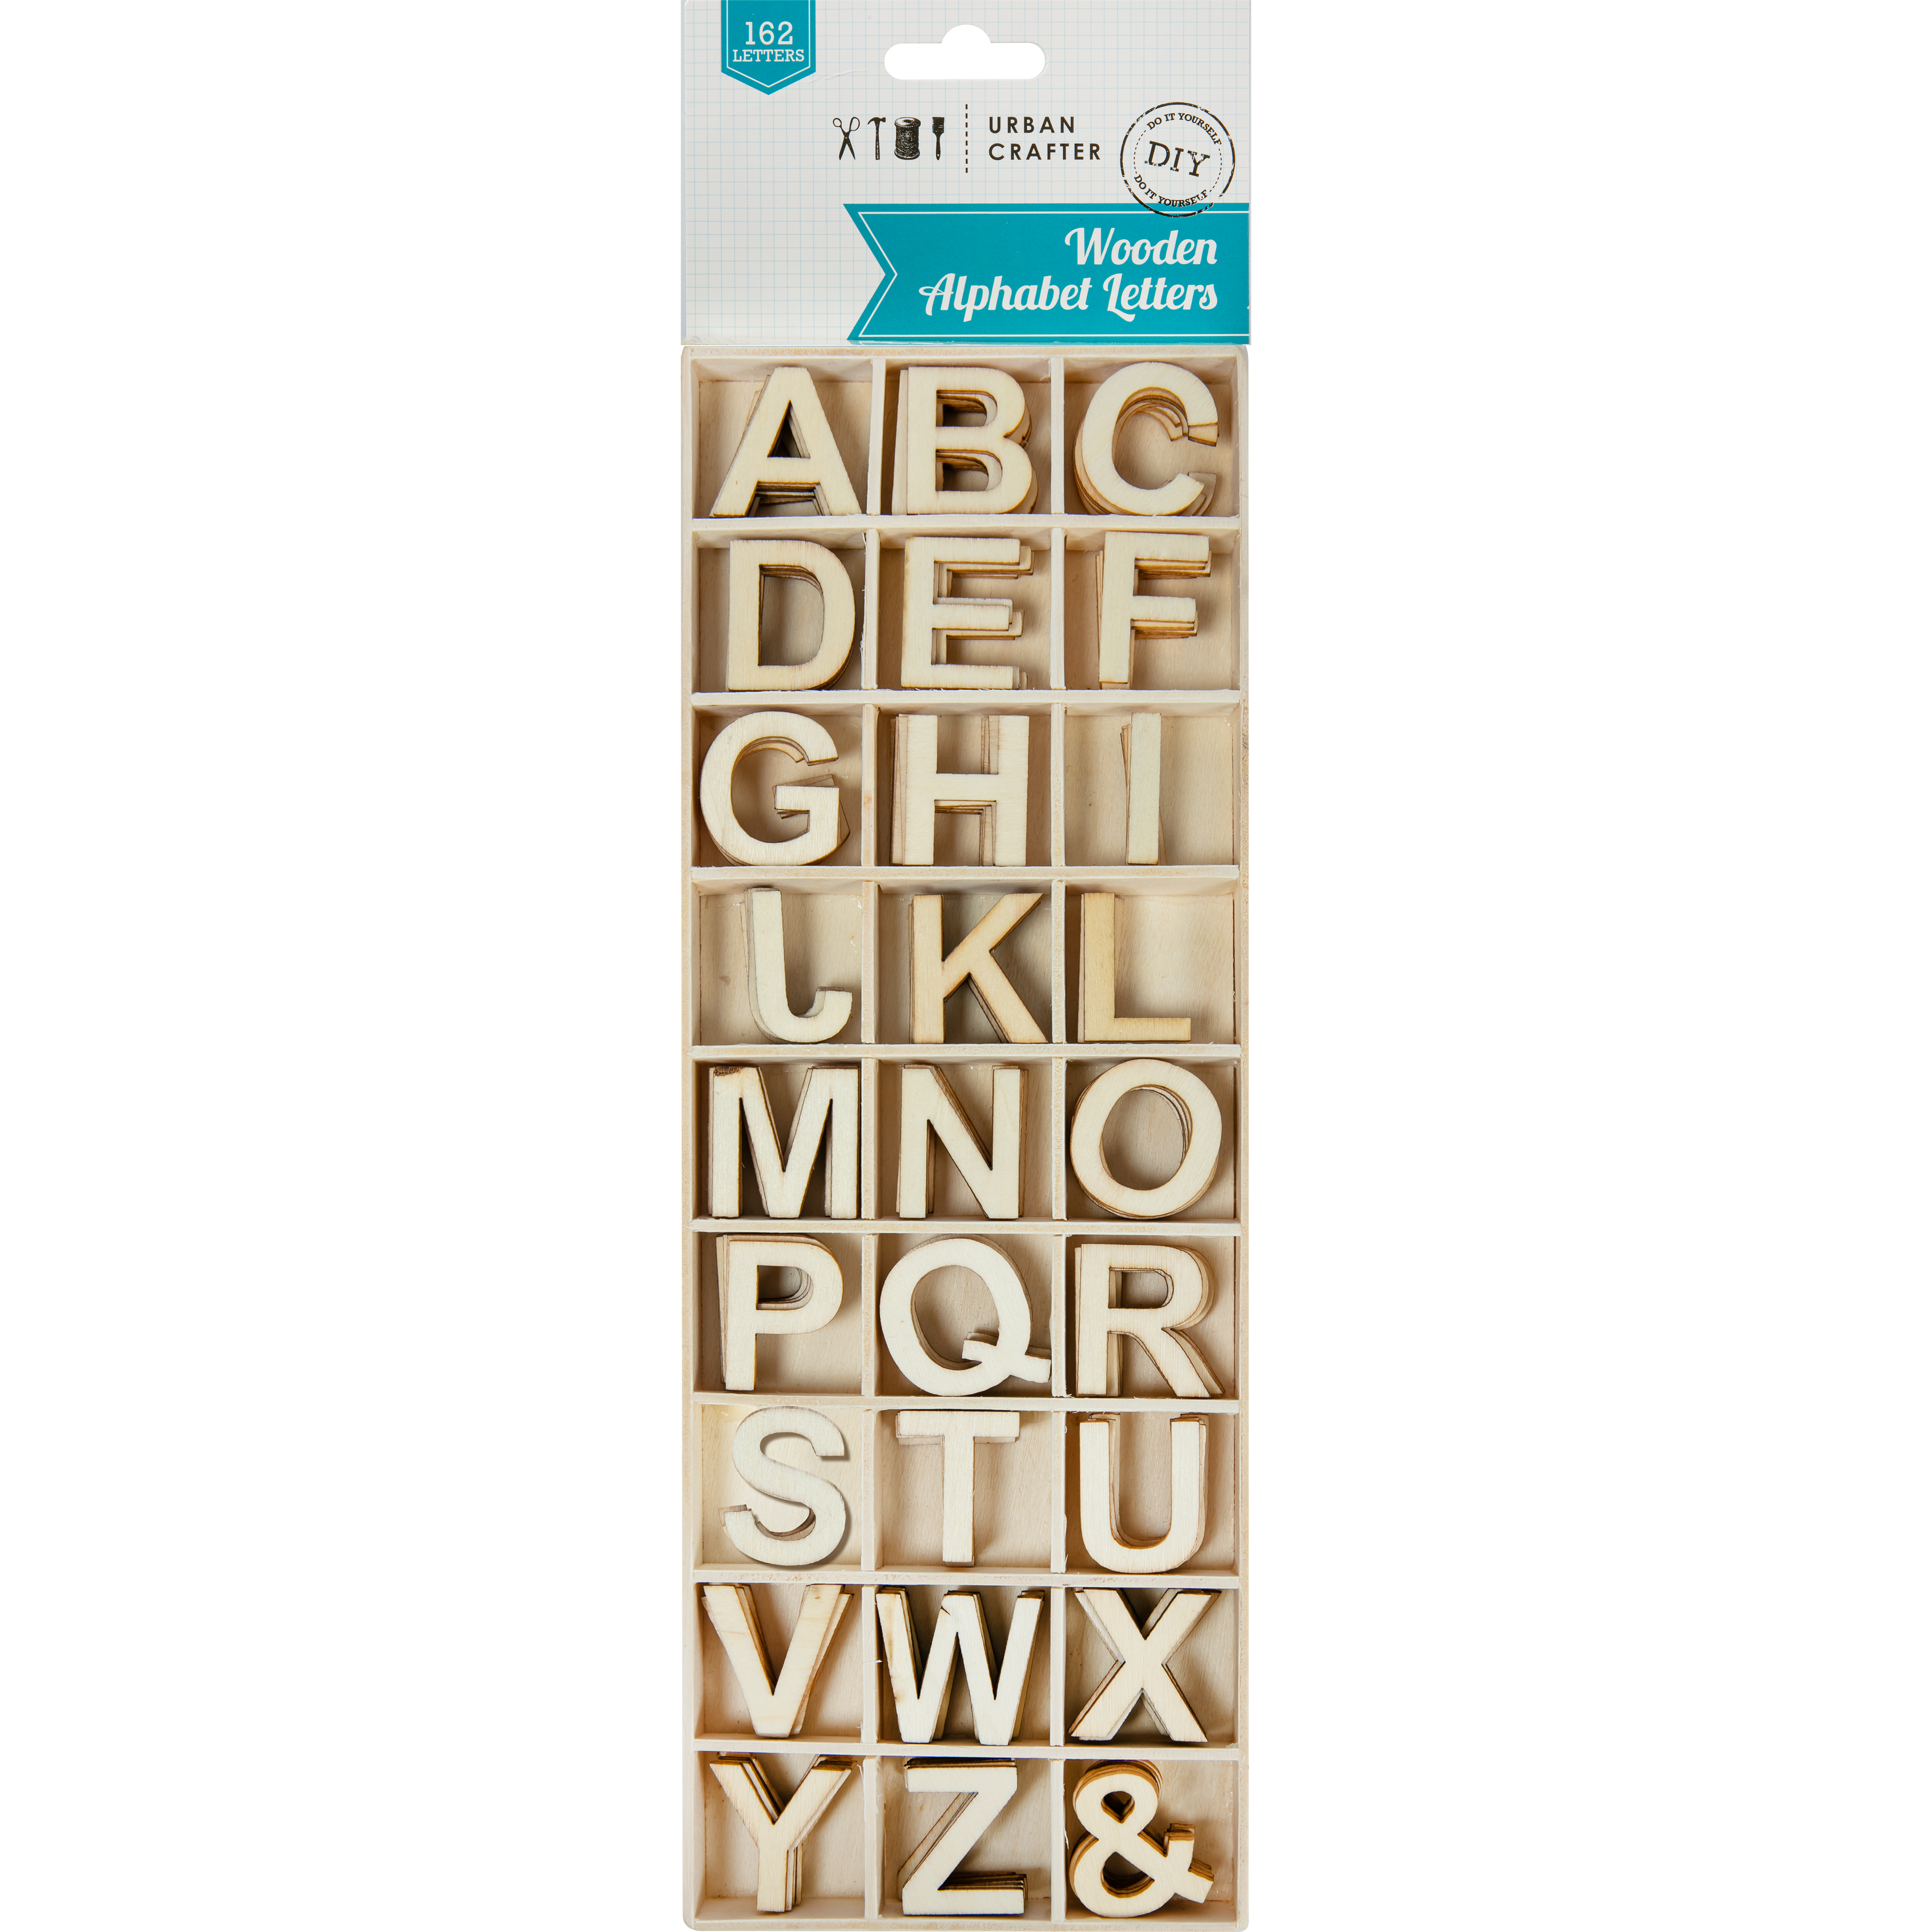 Image of Urban Crafter Wooden Alphabet Letters (162 Pieces)